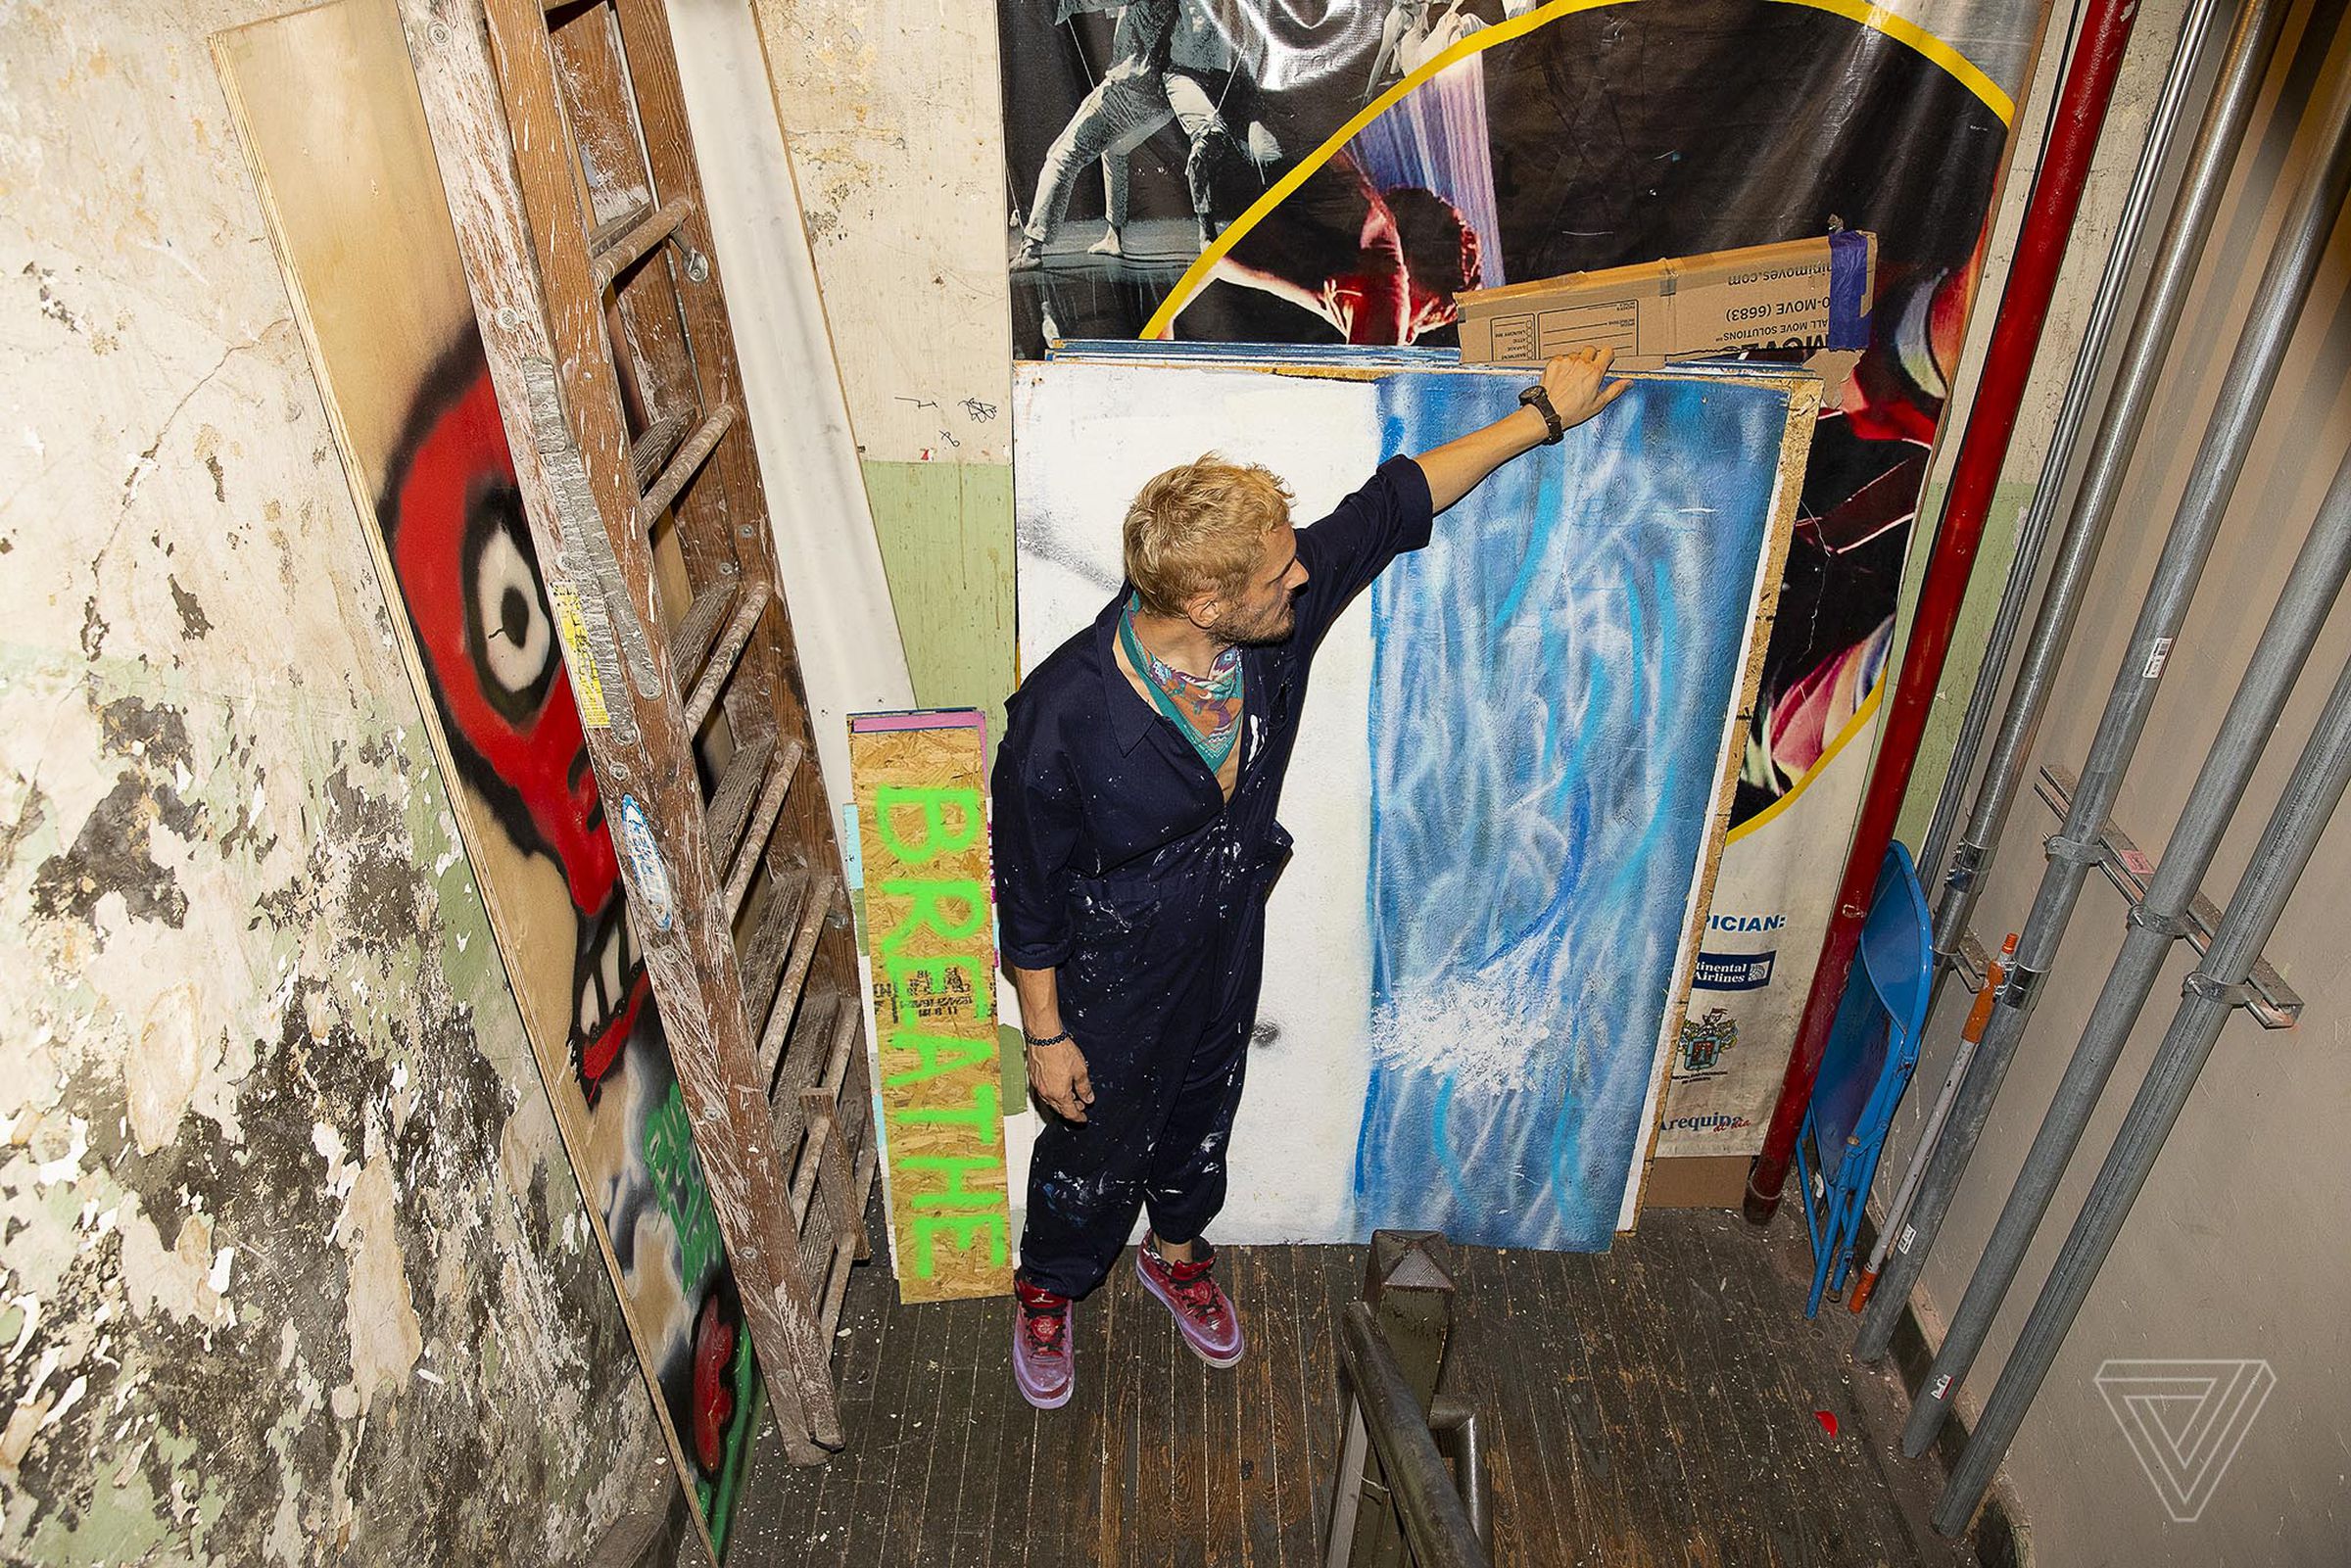 Trevor Croop in the staircase of his former studio space shows the many boards with work by various artists being stored there.